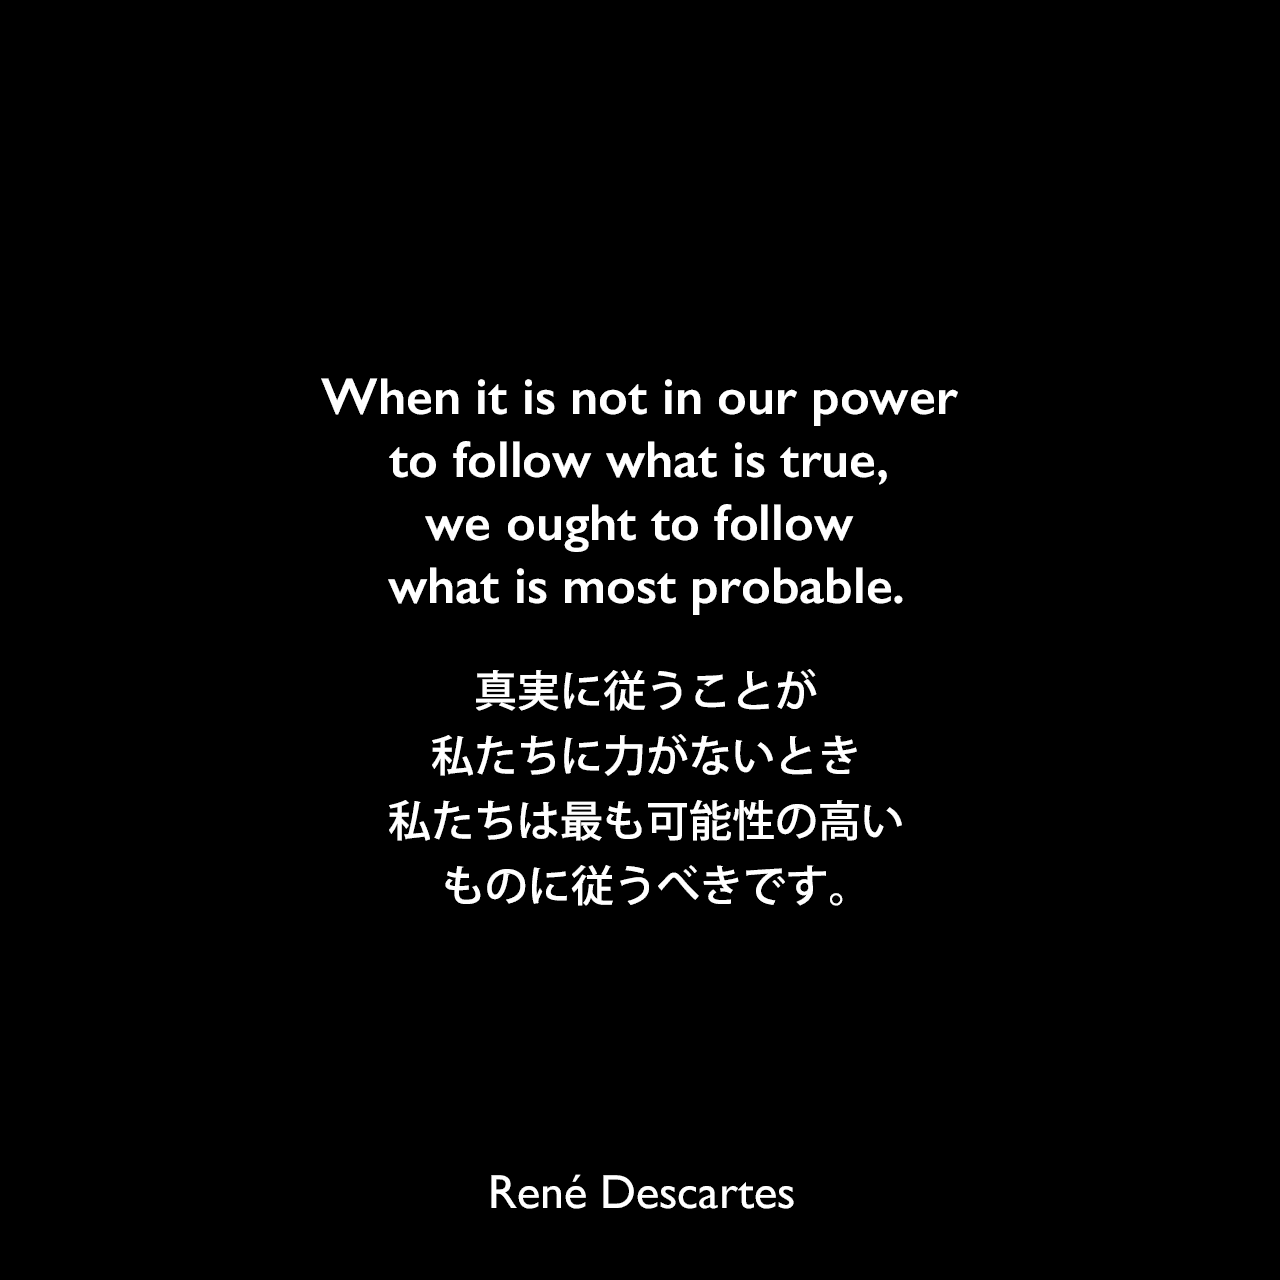 When it is not in our power to follow what is true, we ought to follow what is most probable.真実に従うことが私たちに力がないとき、私たちは最も可能性の高いものに従うべきです。René Descartes